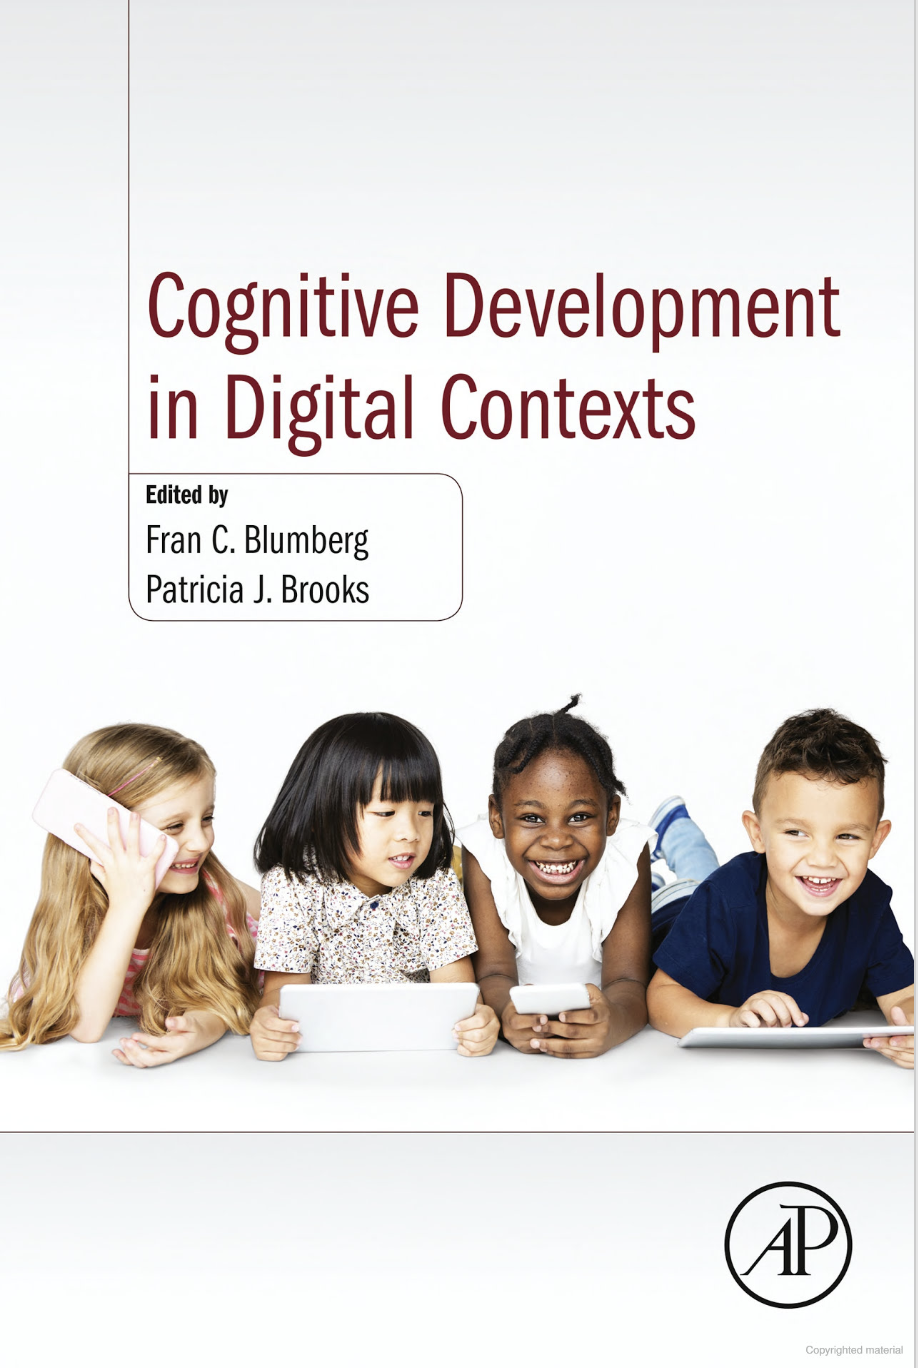 Measuring the Digital and Media Literacy Competencies  of Children and Teens